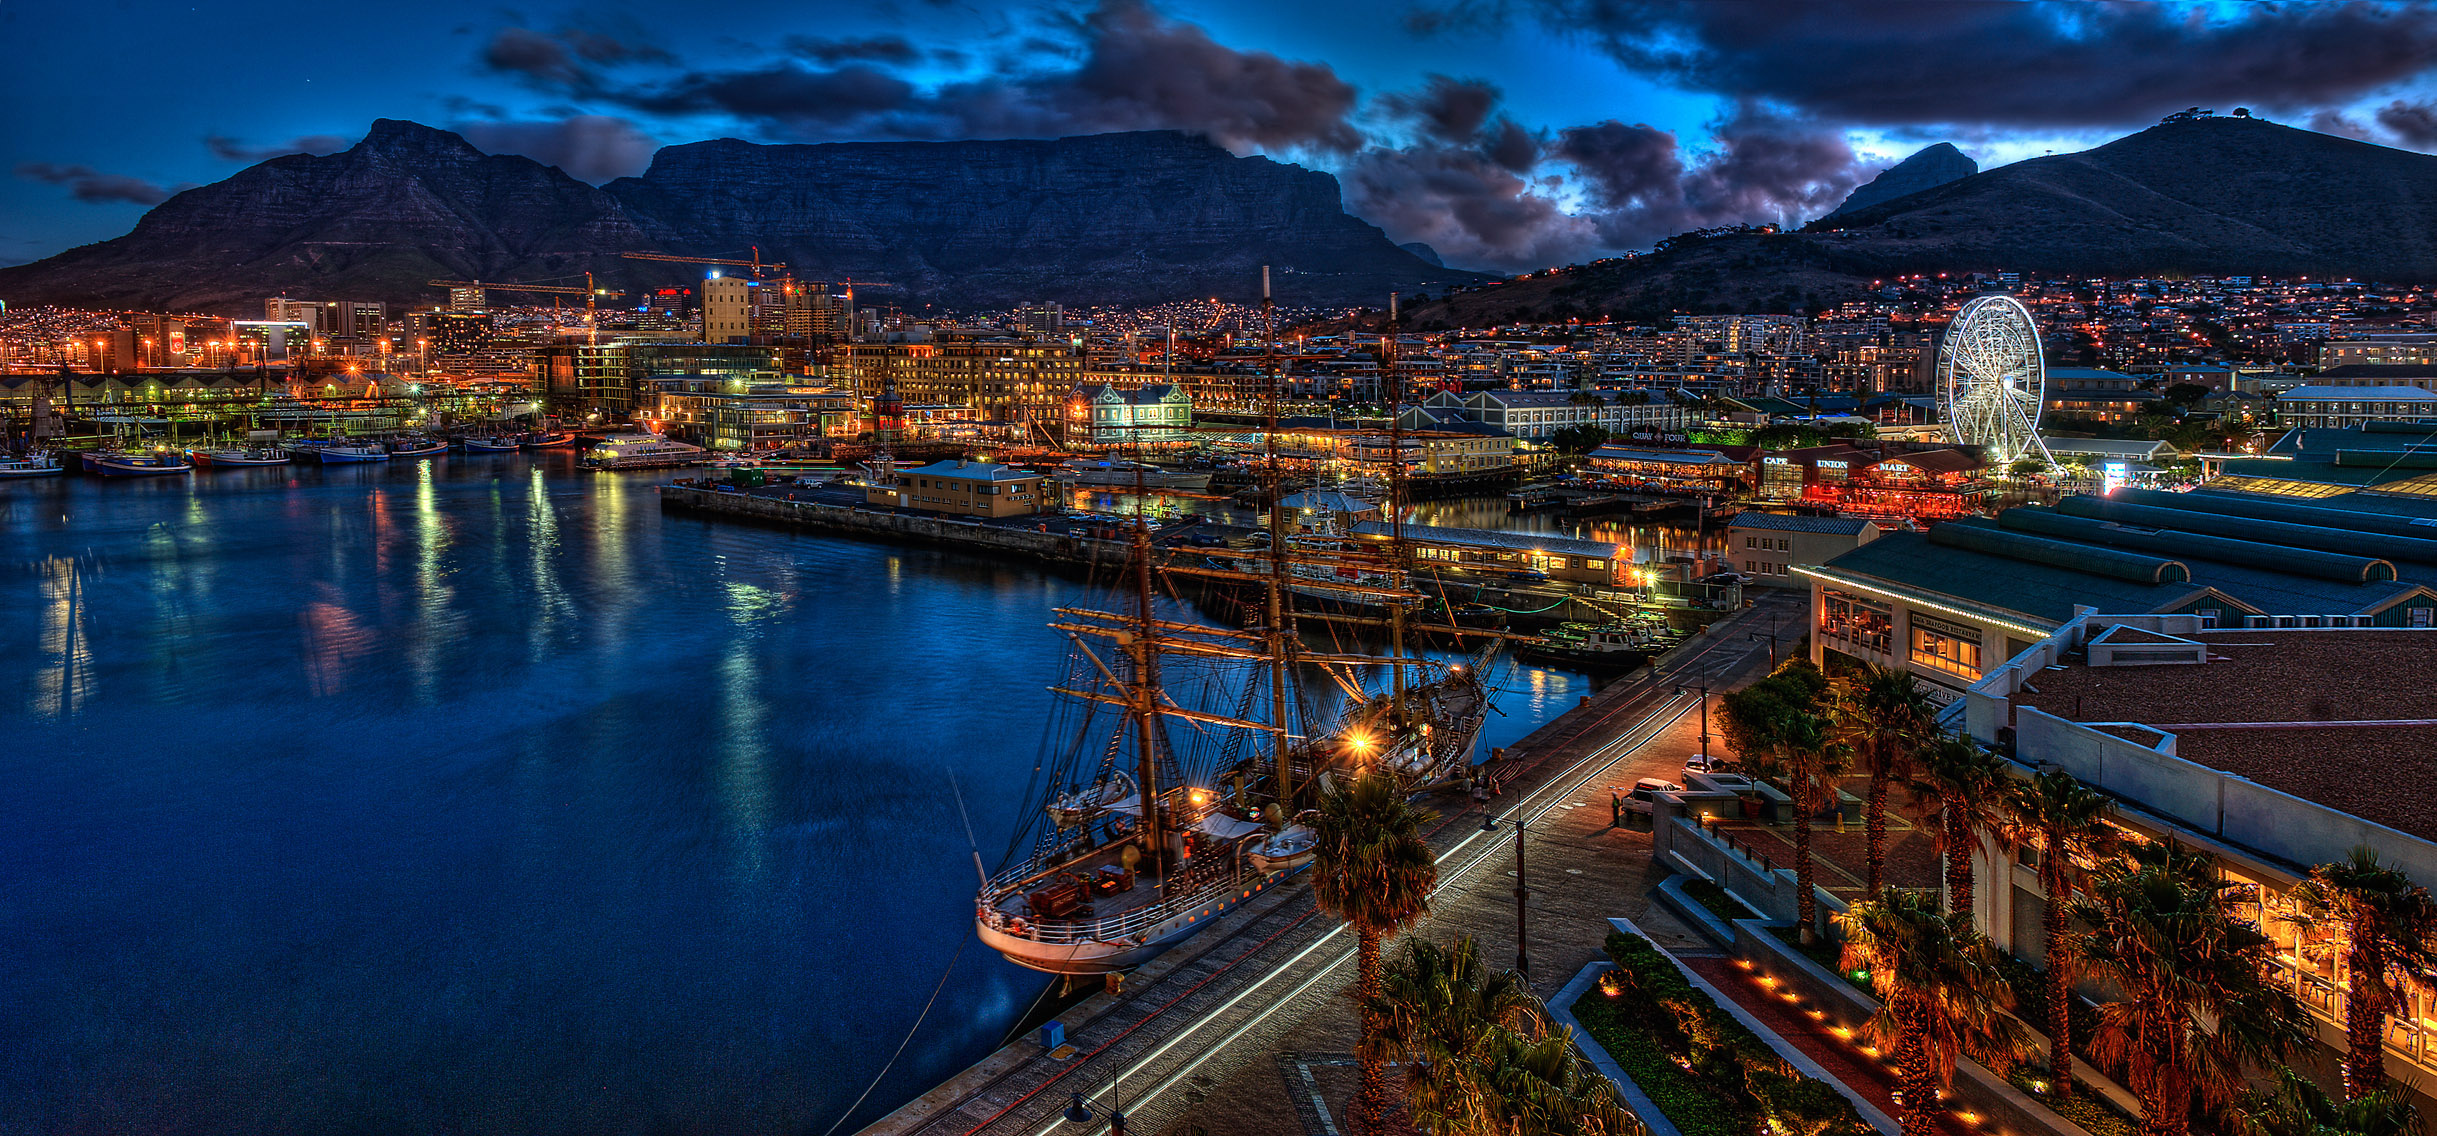 Cape Town Waterfront at night | HDR creme